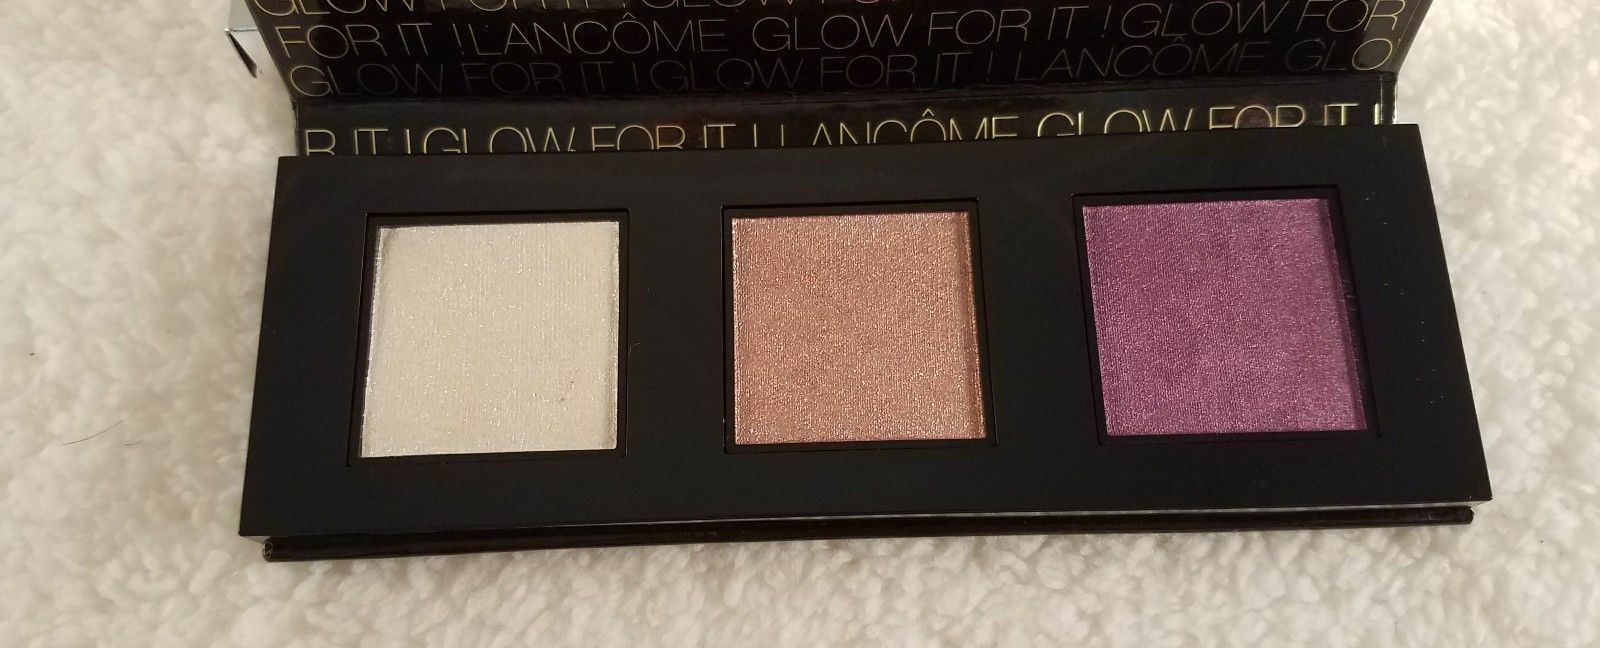 Lancome Glow For It Highlighter Palette 04 Amethyst Radiance